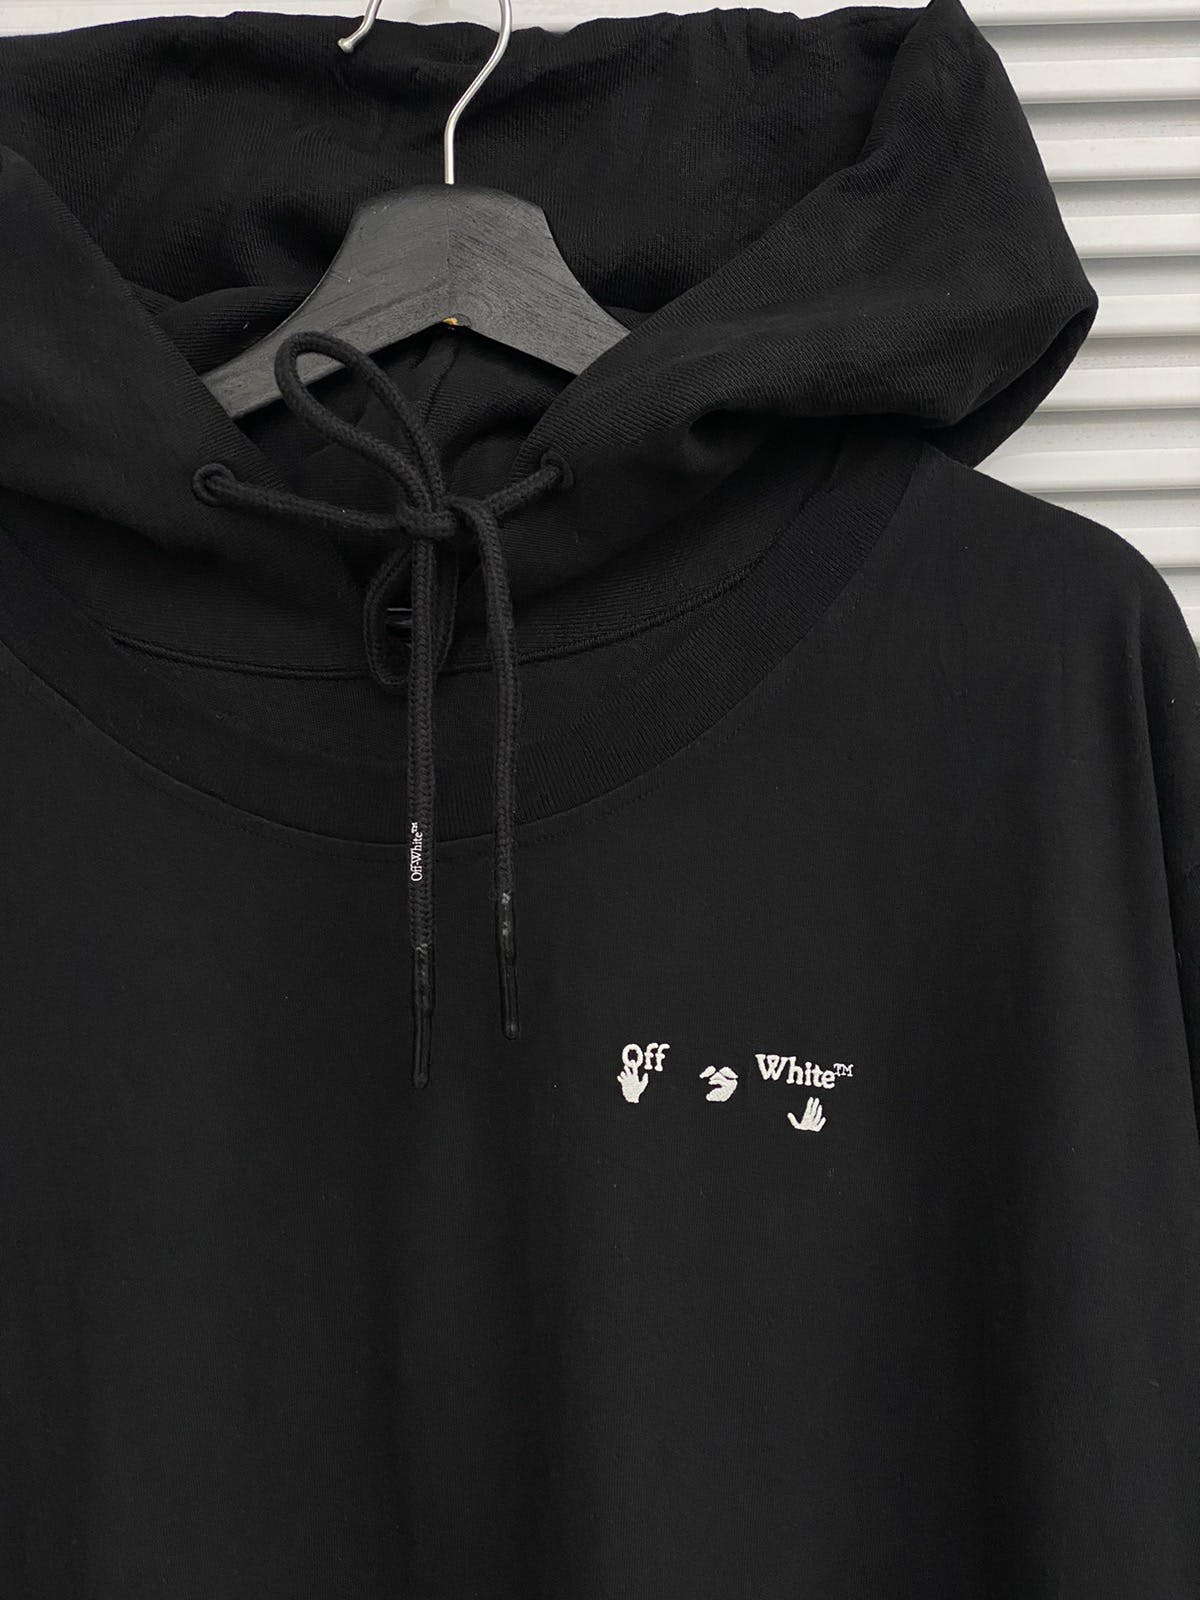 Off-White Virgil Abloh Hoodie Double Layer Connected T-Shirt - 2